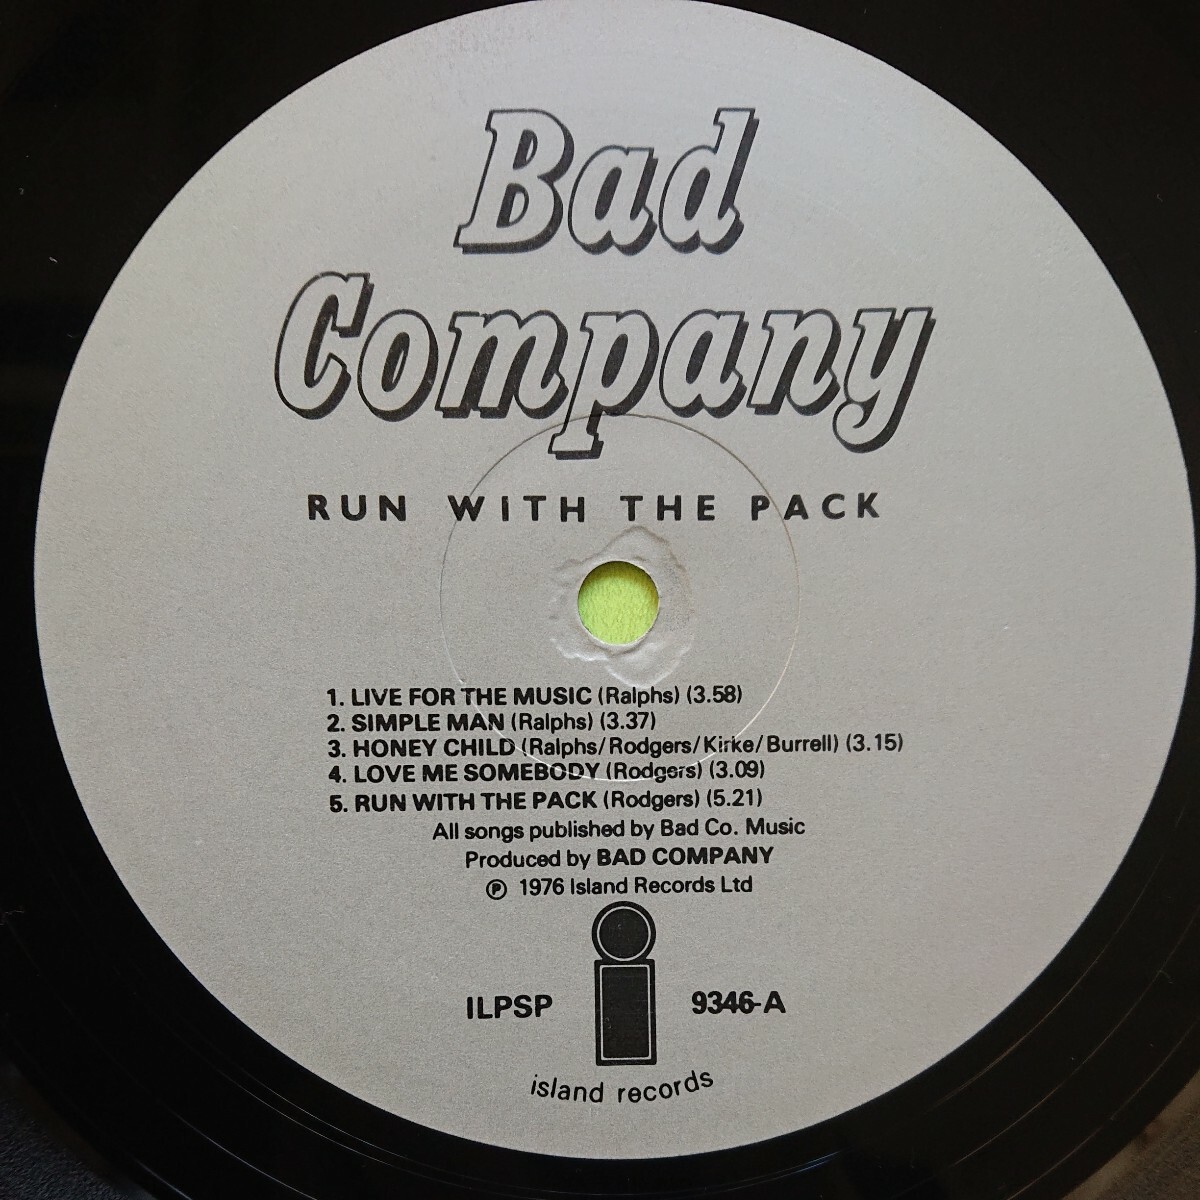 LP(輸入盤)/BAD COMPANY〈RUN WITH THE PACK〉の画像6